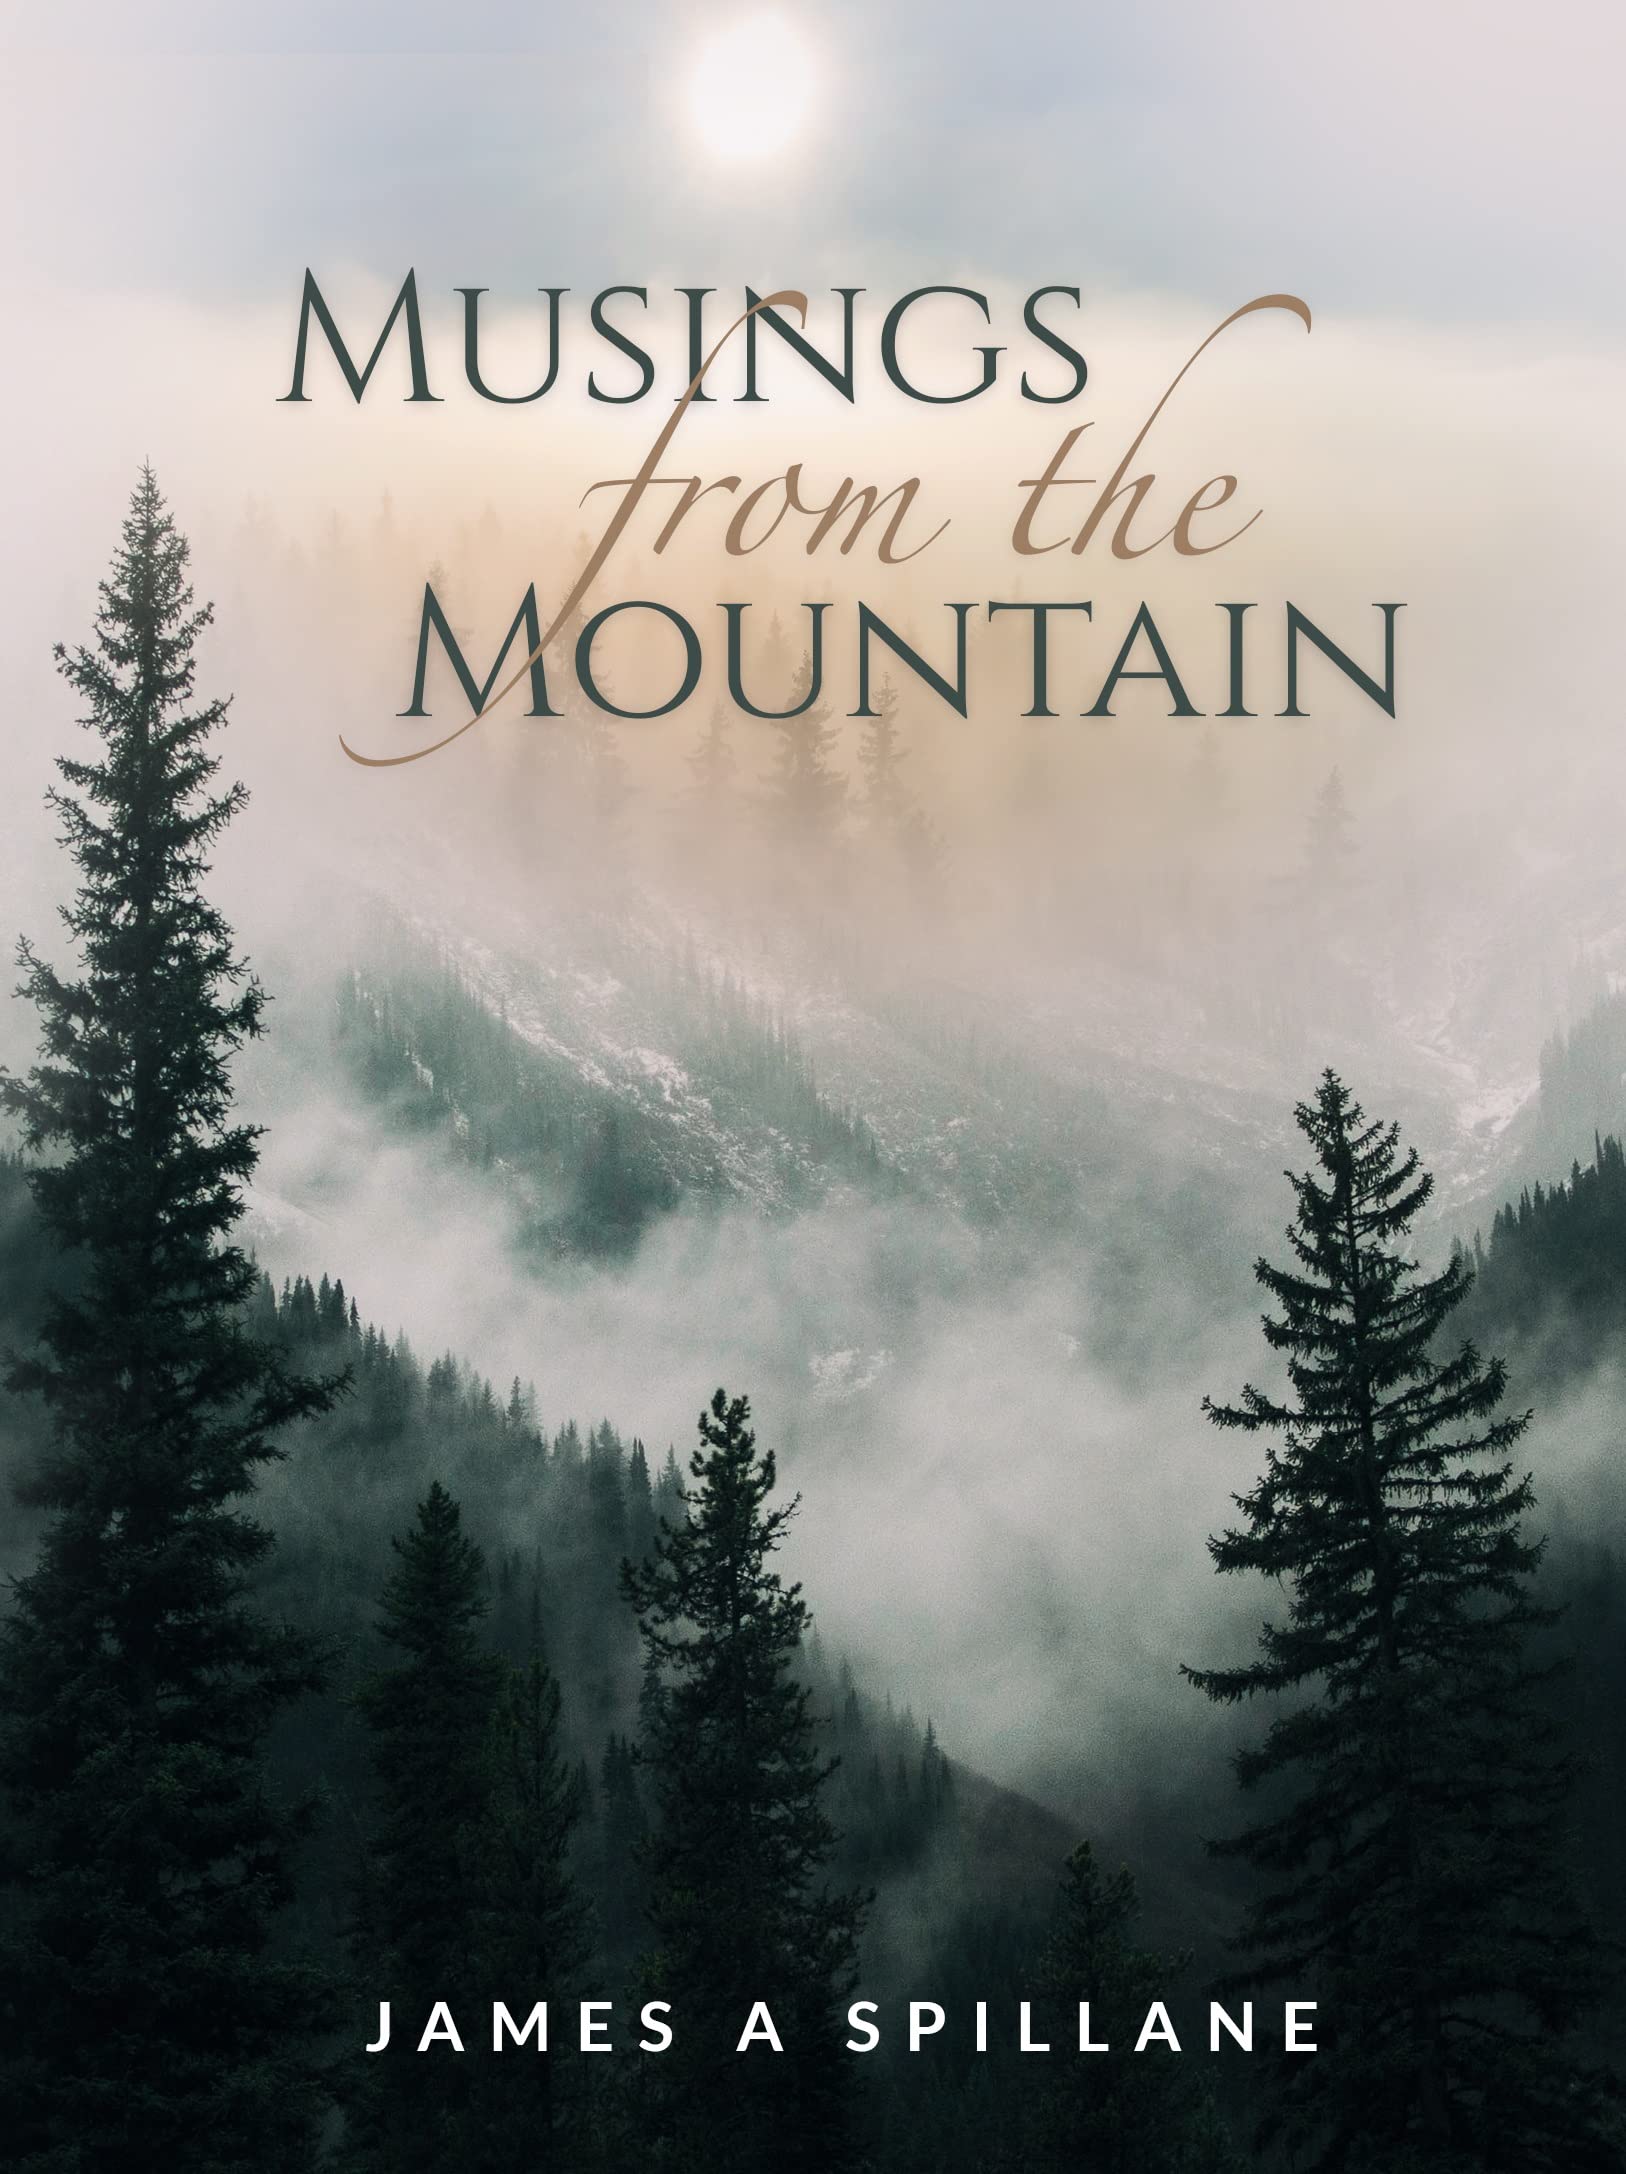 Musings from the Mountain by James A. Spillane